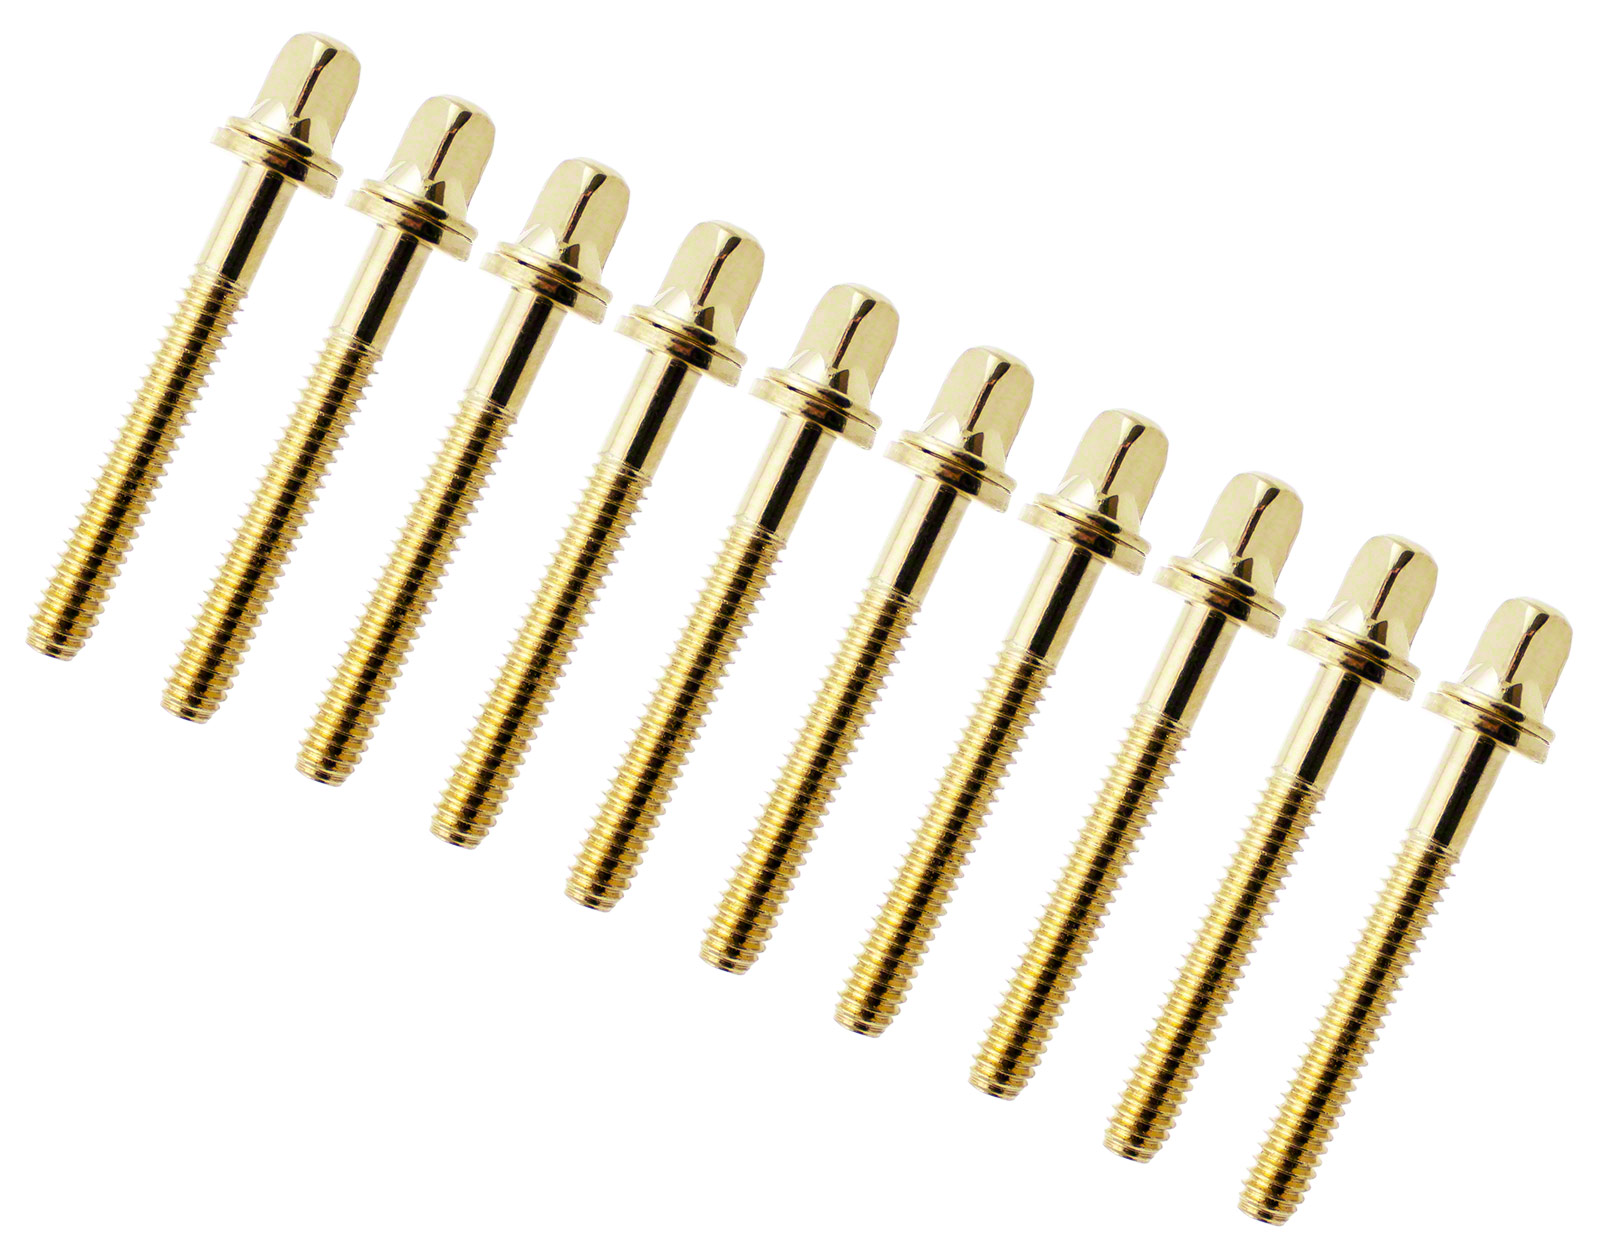 SPAREDRUM TRC-42W-BR - 42MM TENSION ROD BRASS WITH WASHER - 7/32